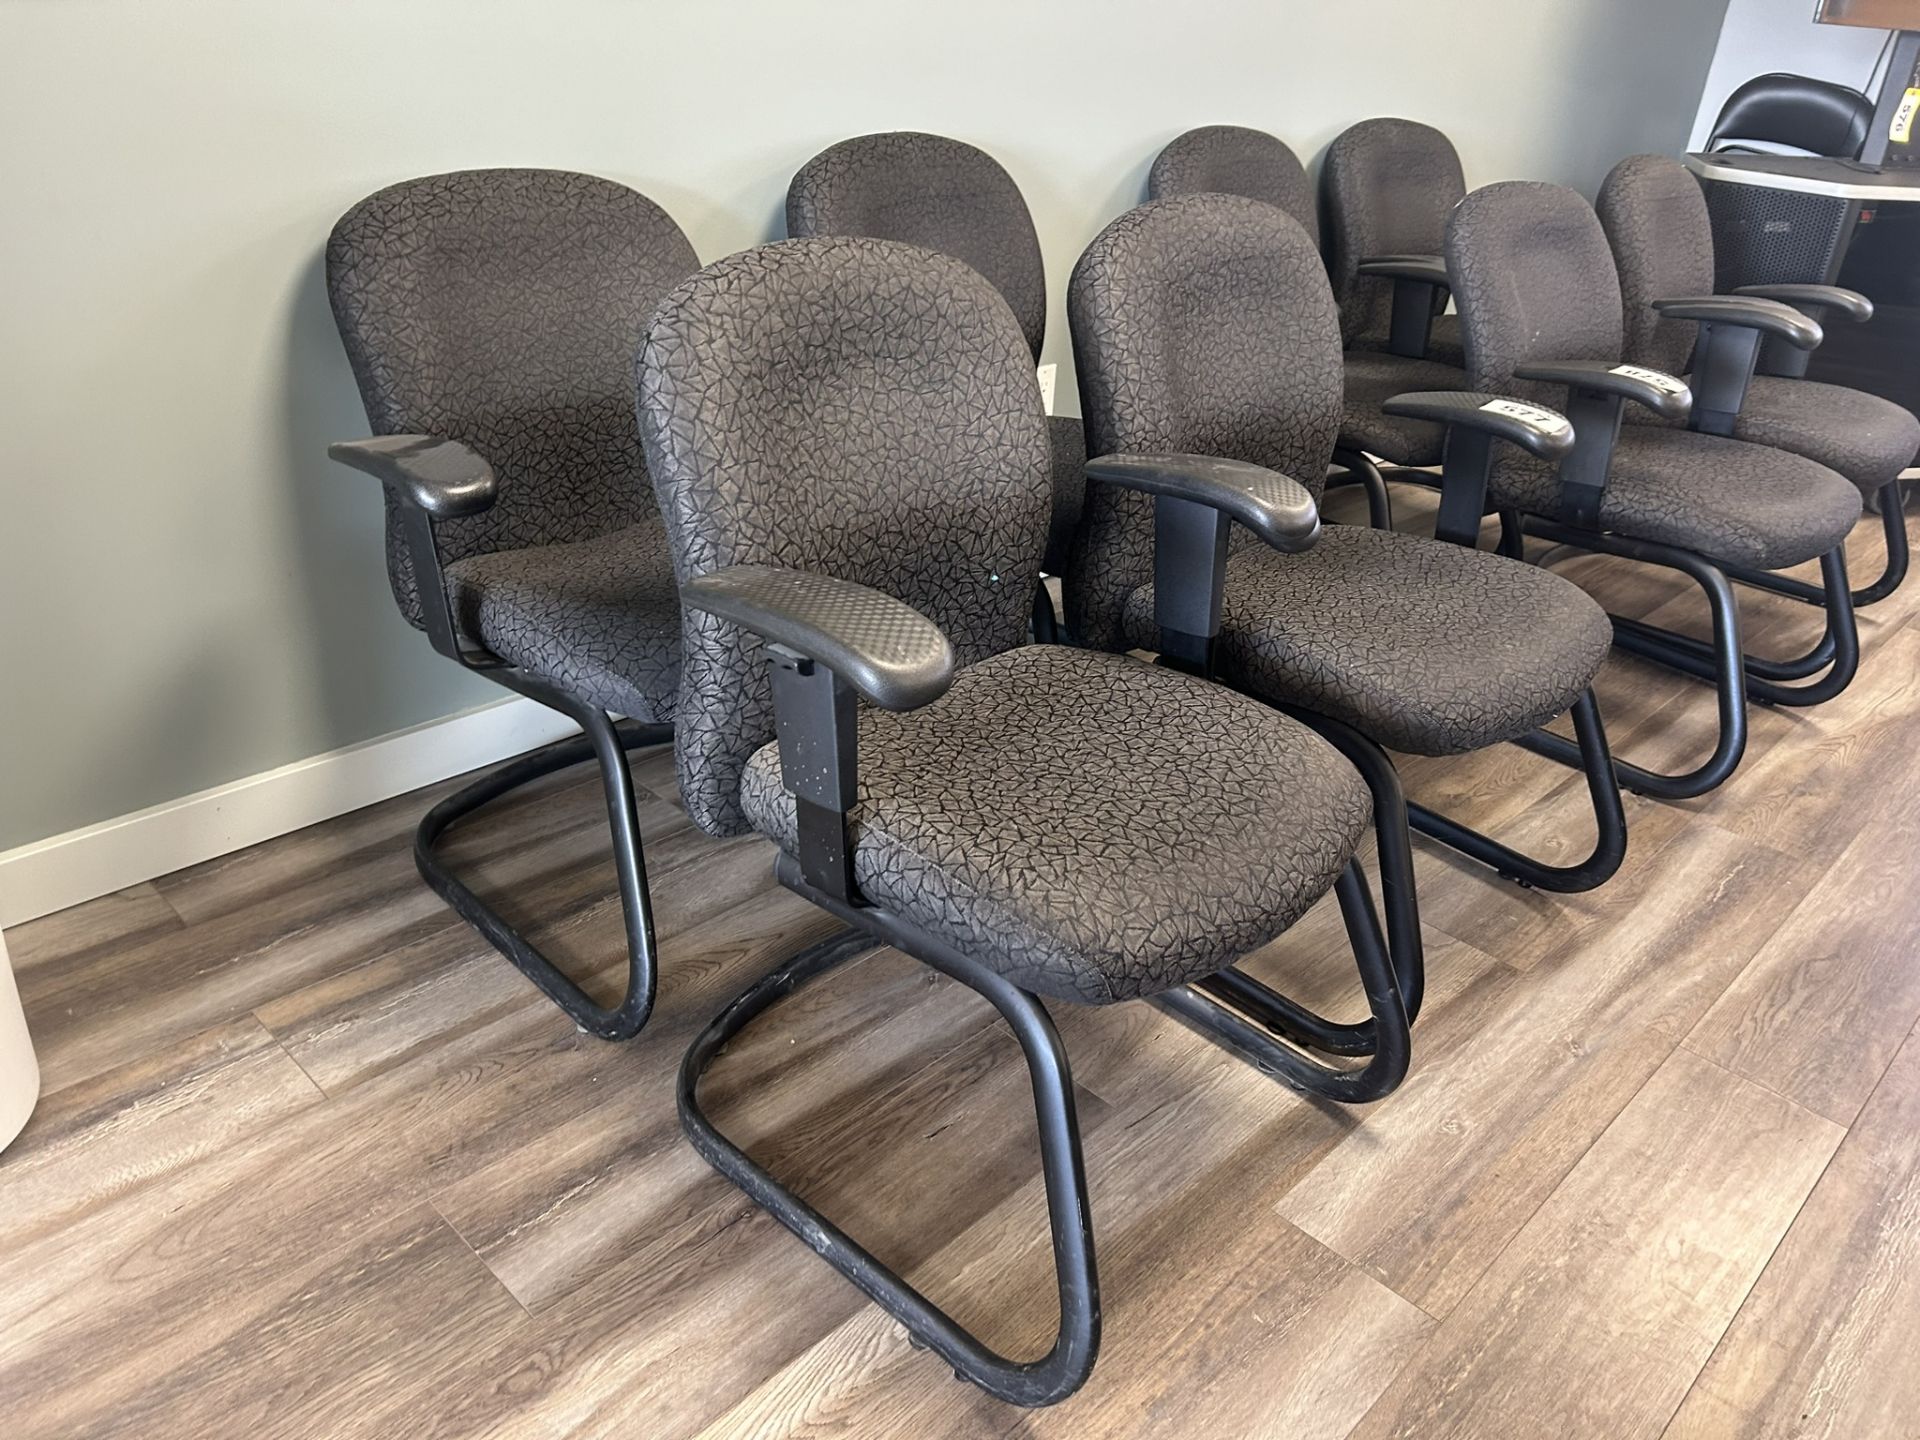 4-SKIDDED CUSHIONED OFFICE CHAIRS - Image 2 of 3